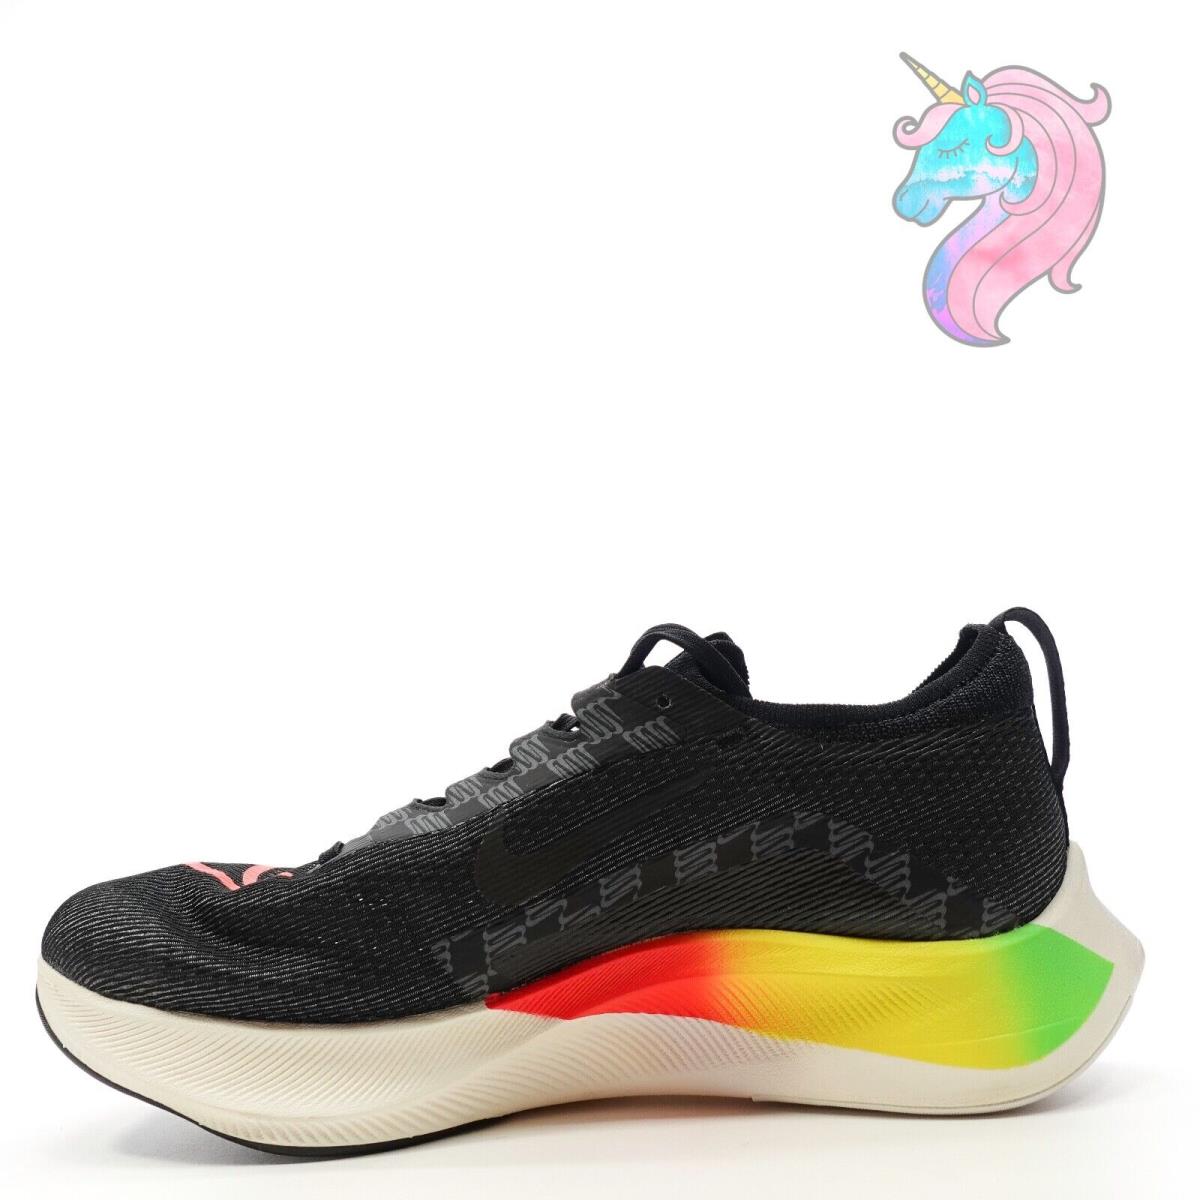 Nike shoes Zoom Fly - Black, Red, Yellow, Green 0